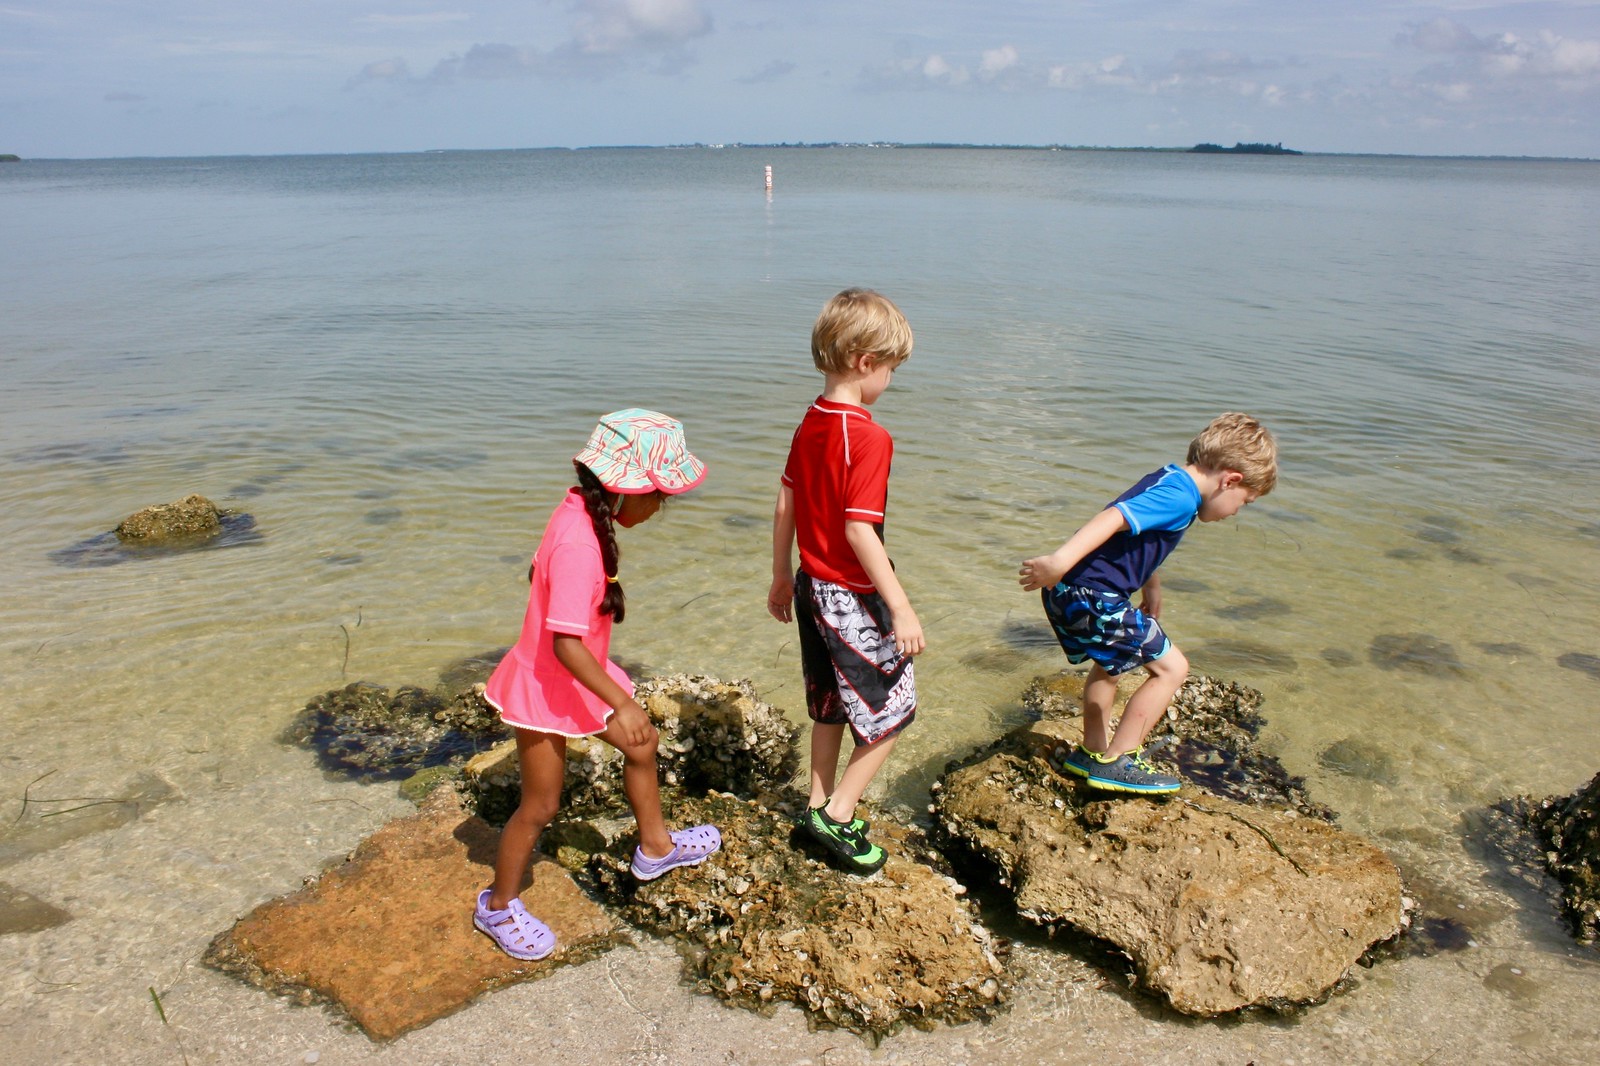 Young children can explore the ocean during Sanibel Sea School's Sea Squirts Day Camps.